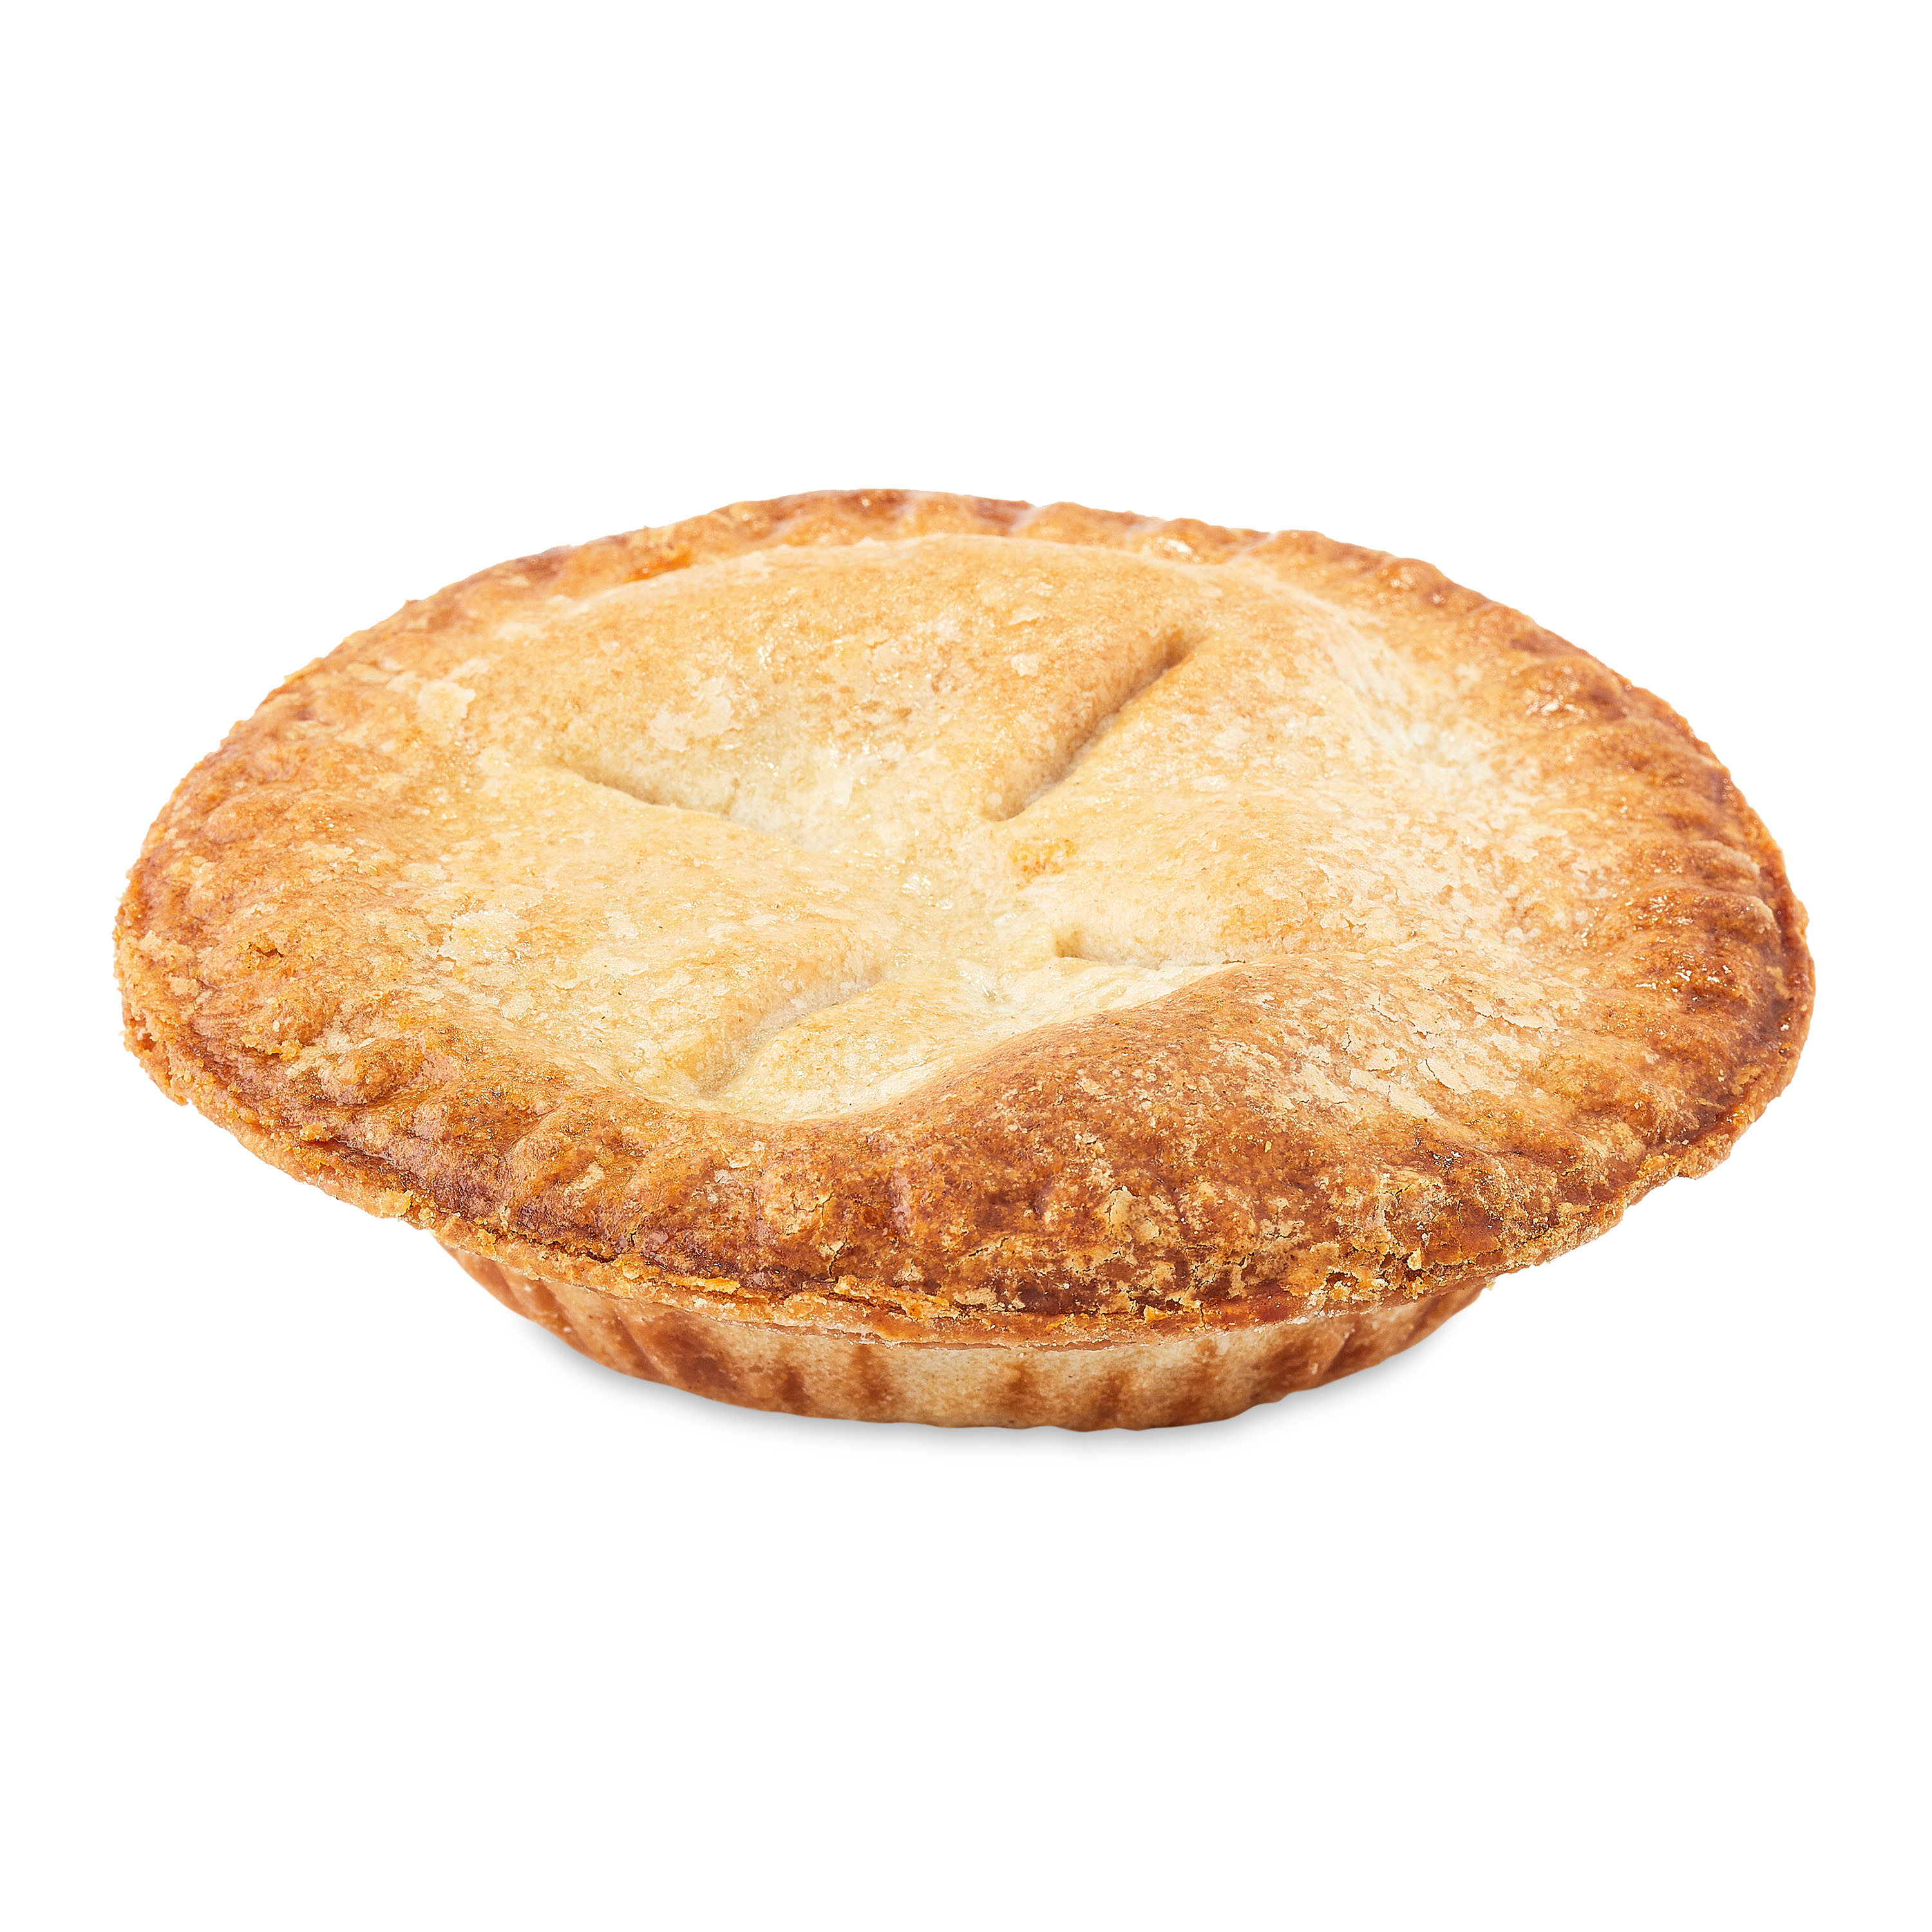 Freshness Guaranteed Apple Pie, 4 in, 3.5 oz - image 3 of 9